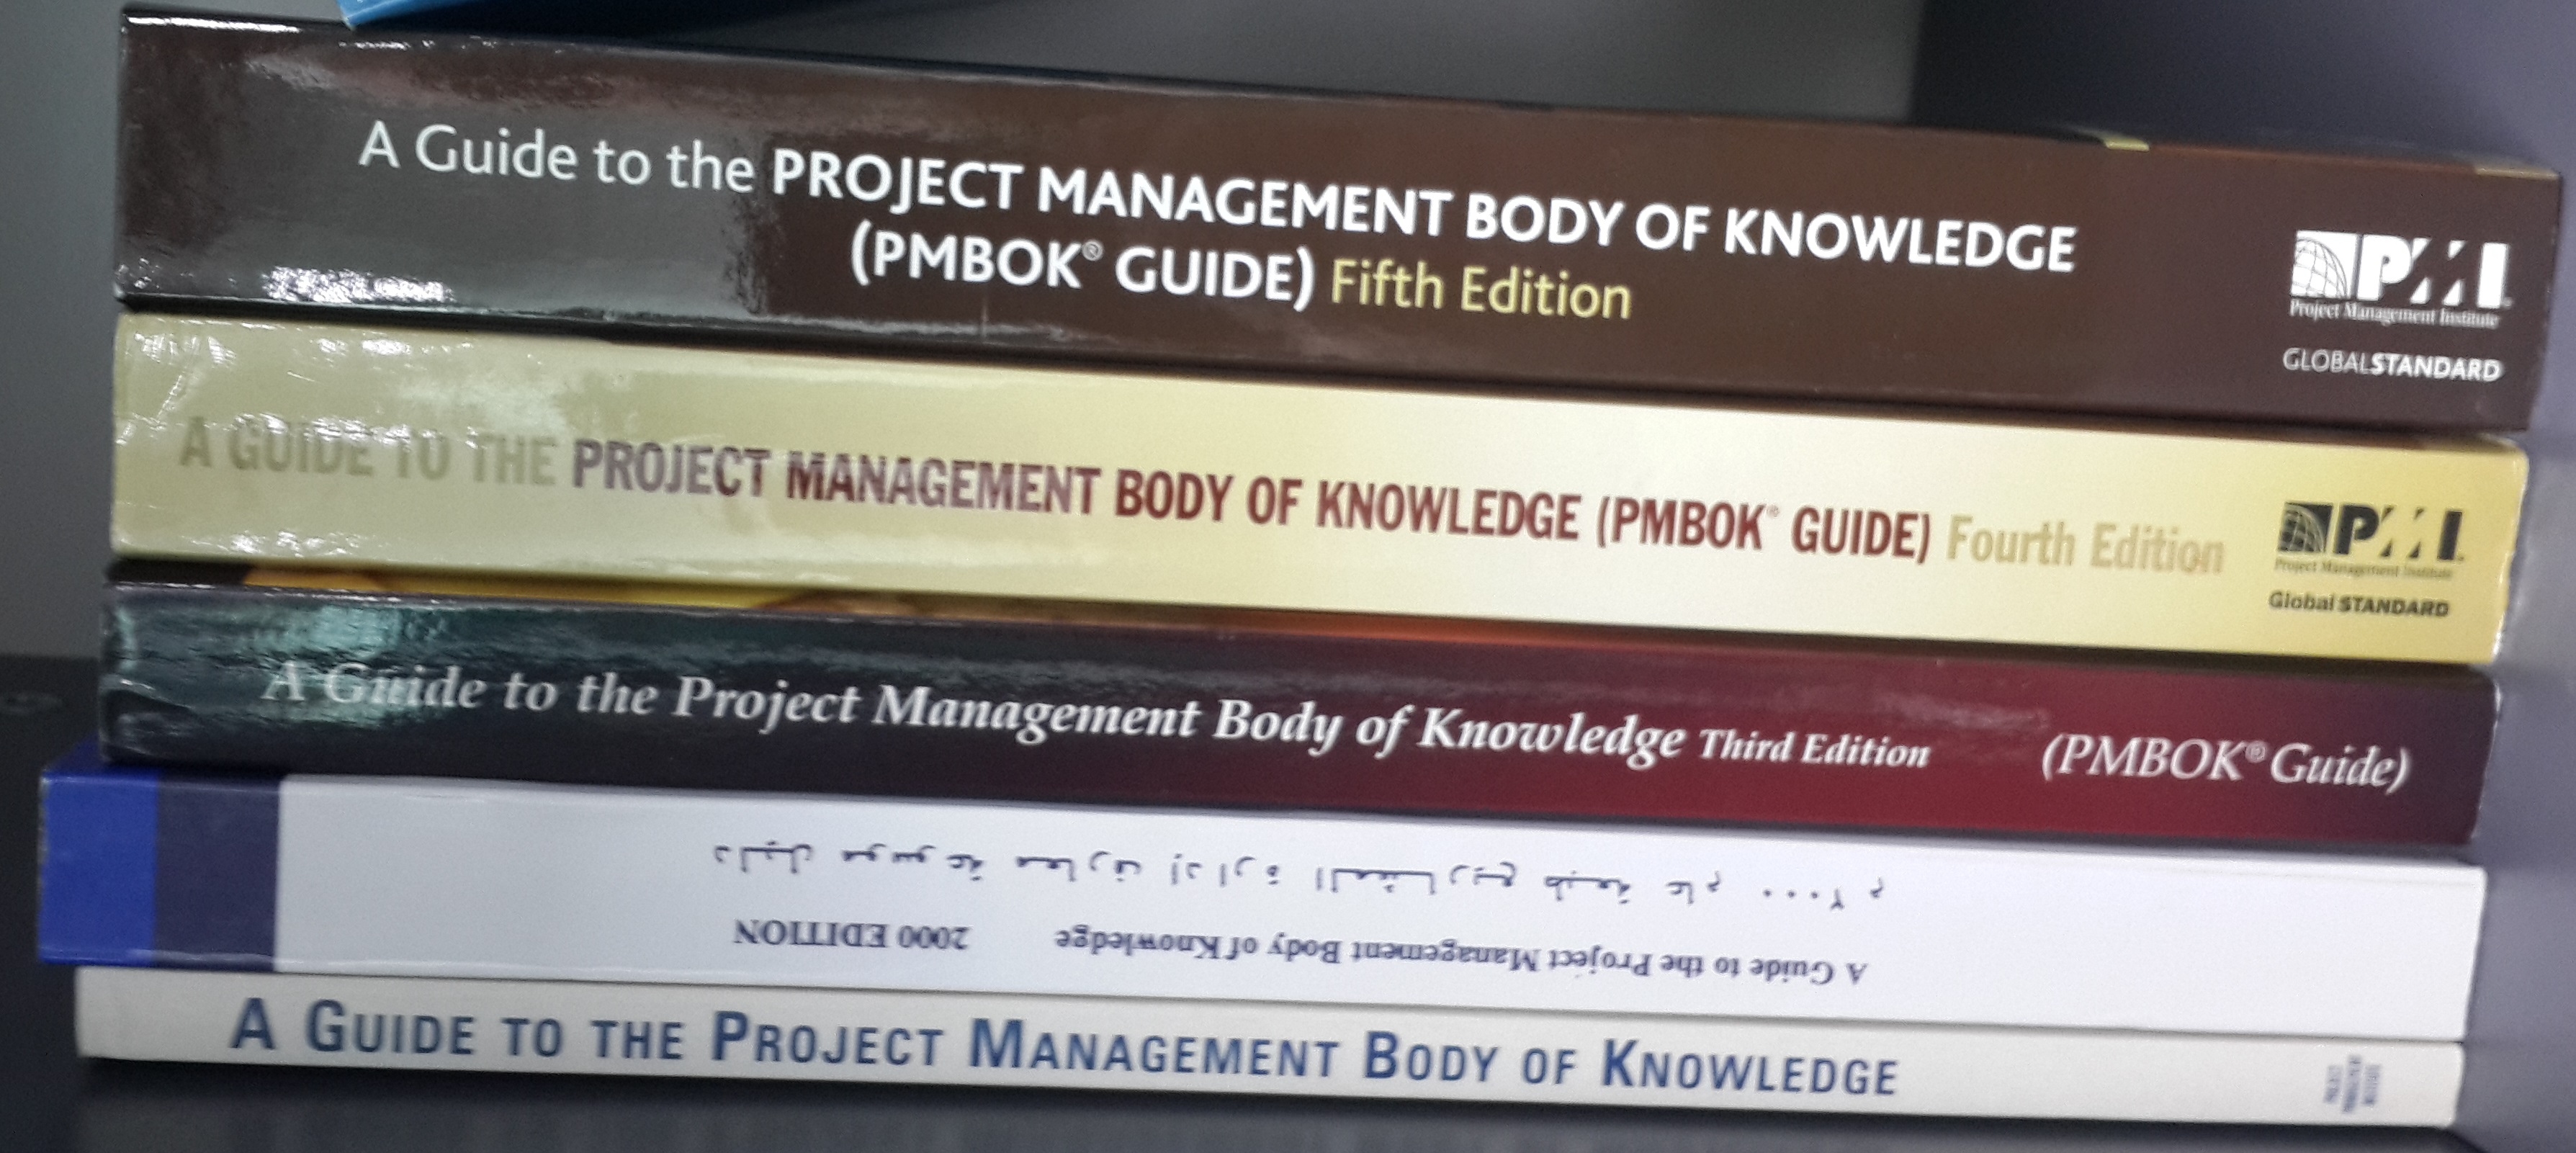 The PMBOK Guide, a histortical perspective